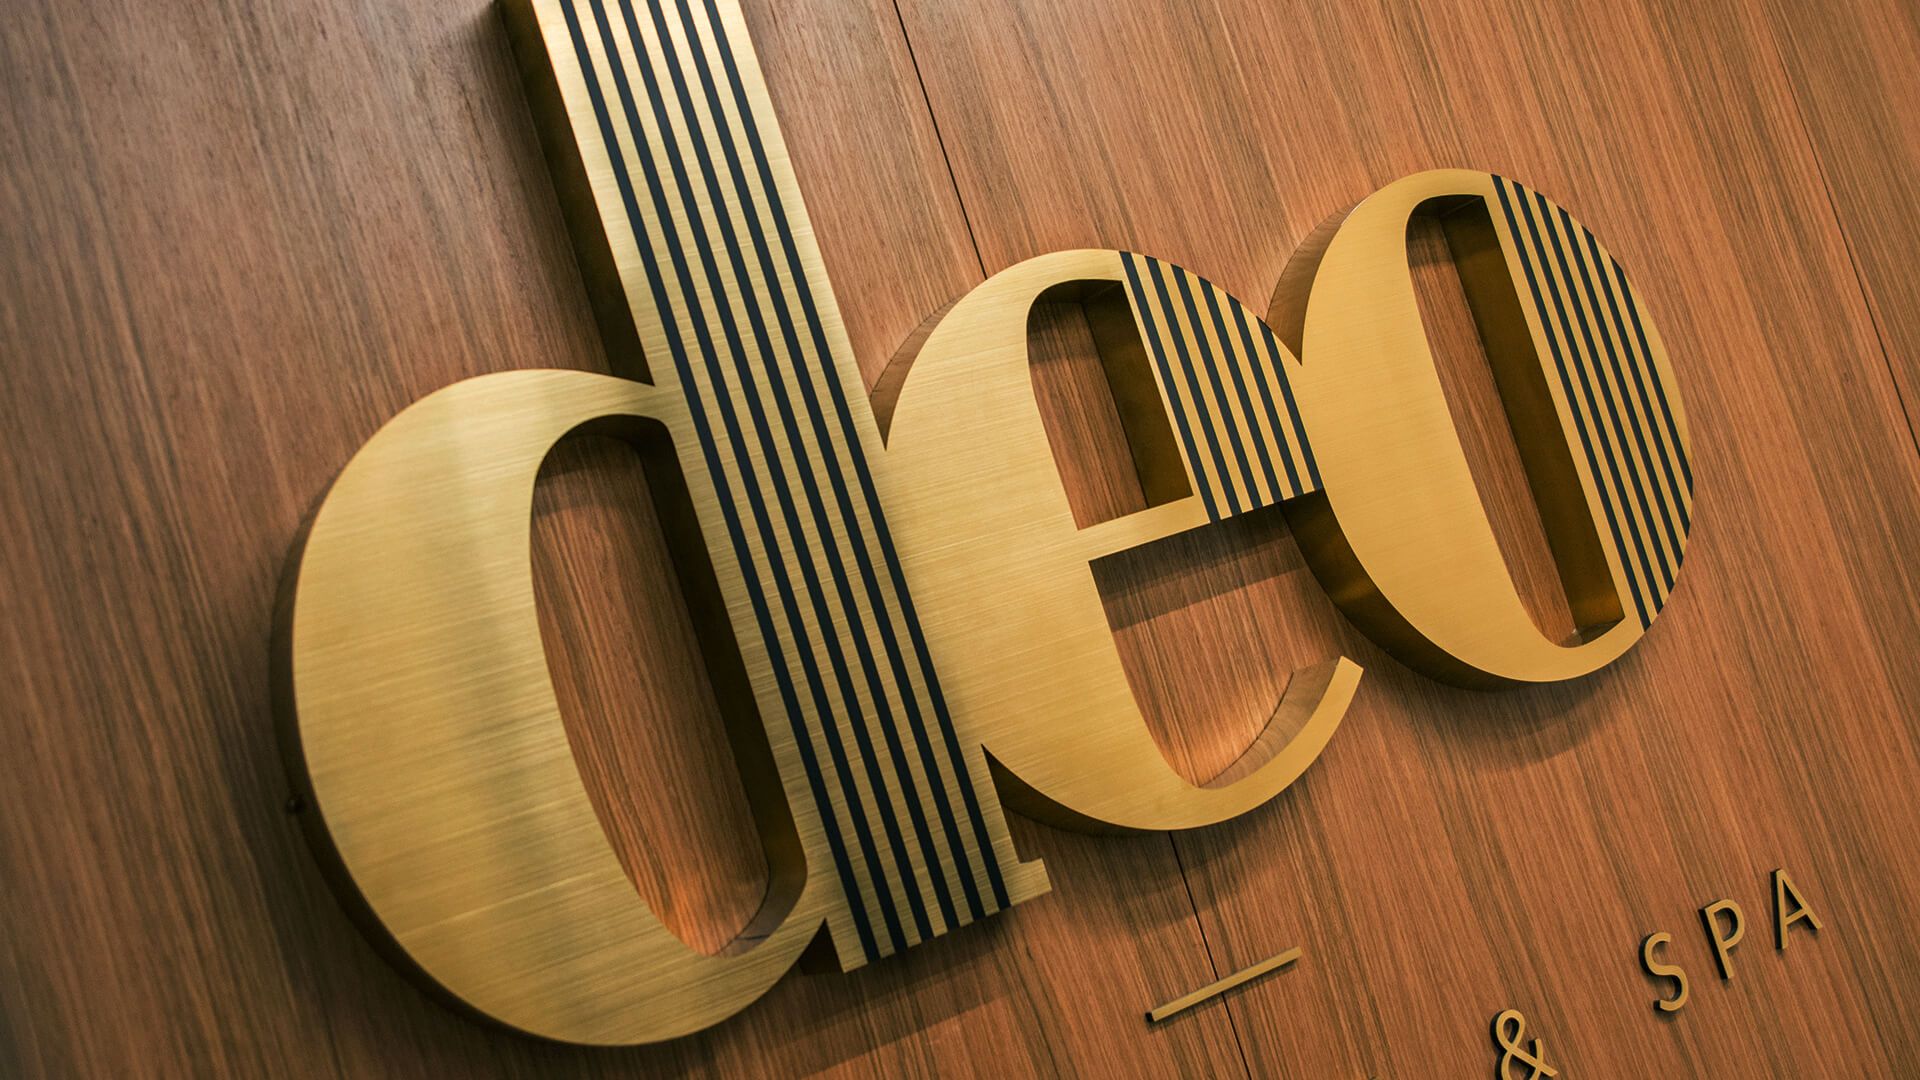 deo residence deo hotel spa - deo-residence-lettering-from-solid-steel-brushed-lettering-over-the-entry-to-the-office-building-lettering-at-height-mounted-to-the-wall-lettering-on-sheets-lettering-on-decks-logo-firm-gdansk